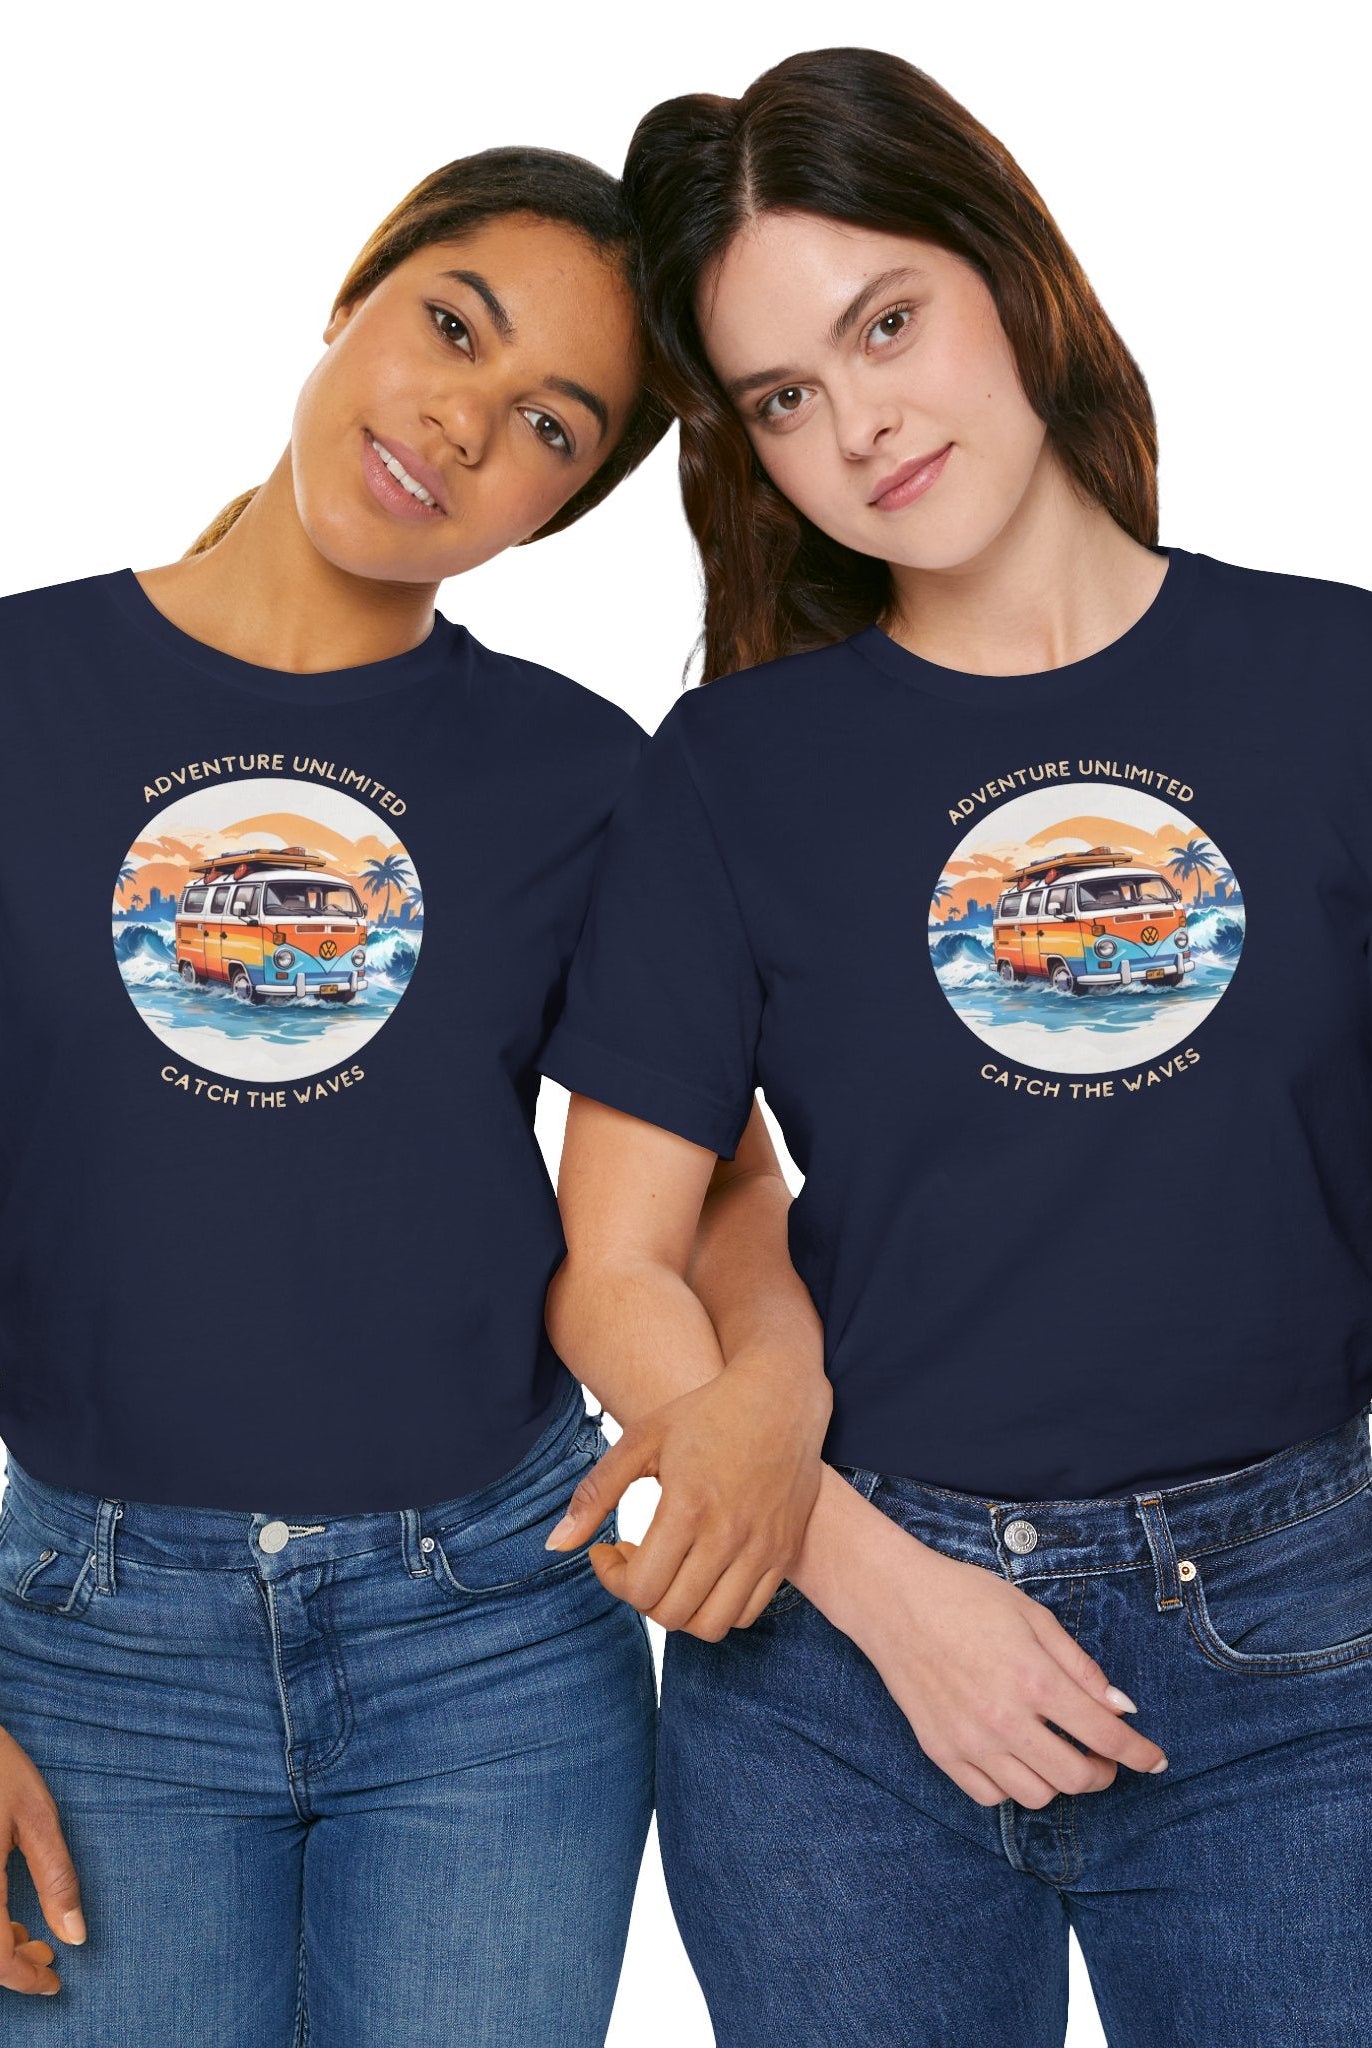 Adventure Unlimited Surfing T-Shirt featuring two women in navy tees with ’the best day’ slogan. EU, Bella & Canvas, direct-to-garment printed